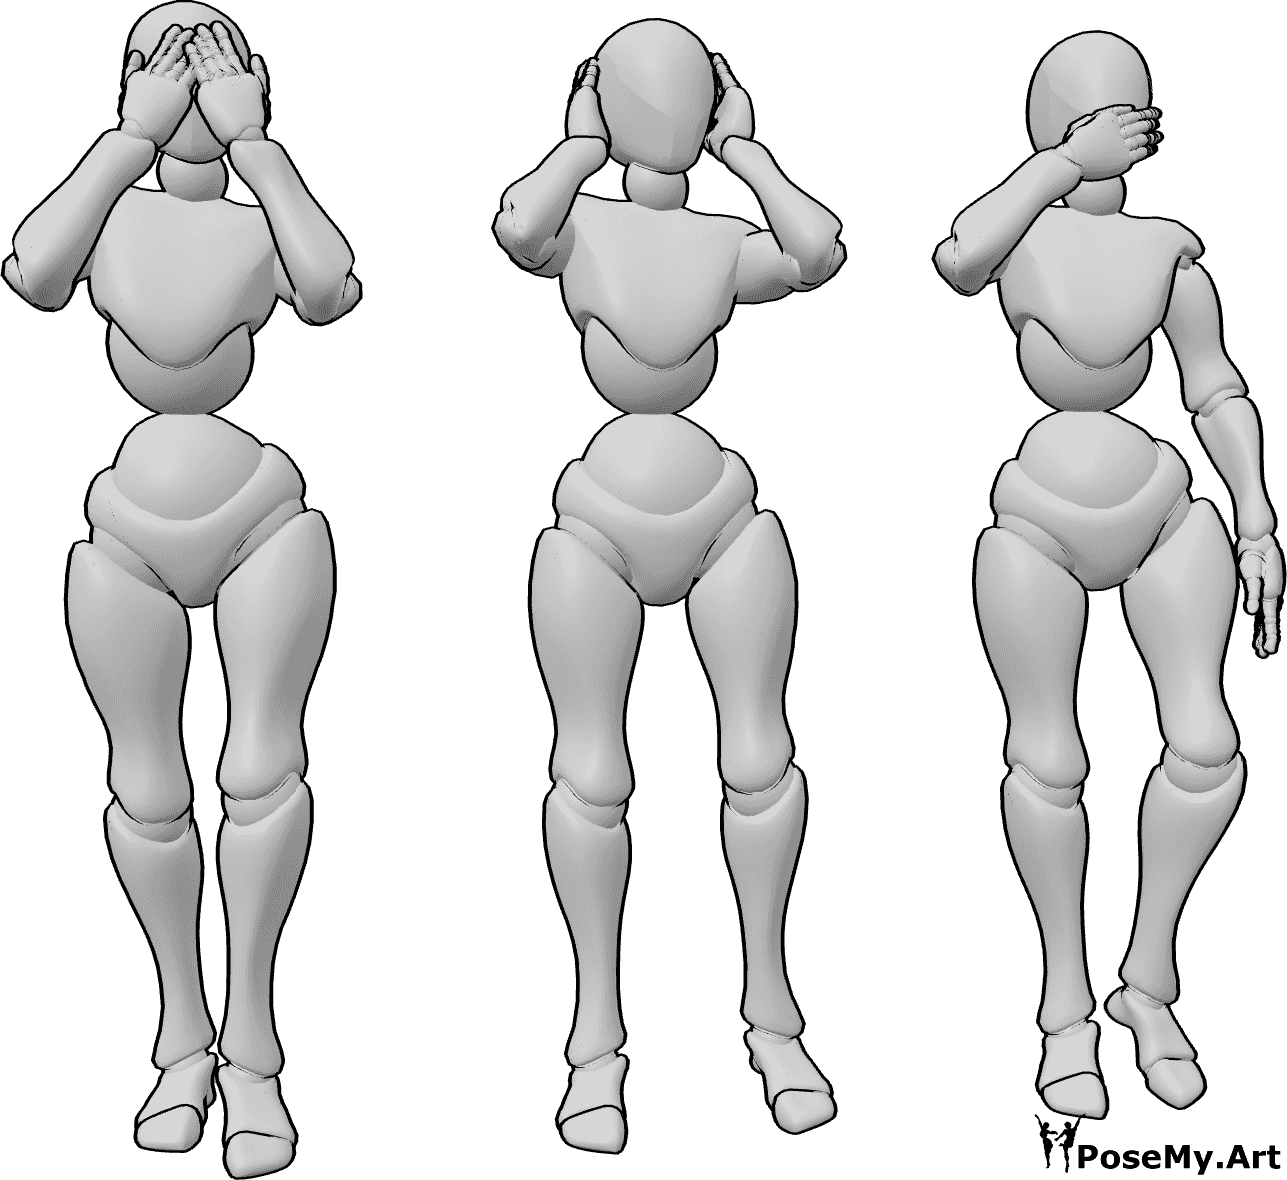 Poses for Artists - It's easy to invest in your art. Download over 800  inspirational pose references for figure, gesture and character drawing on  https://gumroad.com/posemuse 20% off today with artist code MAR20off .